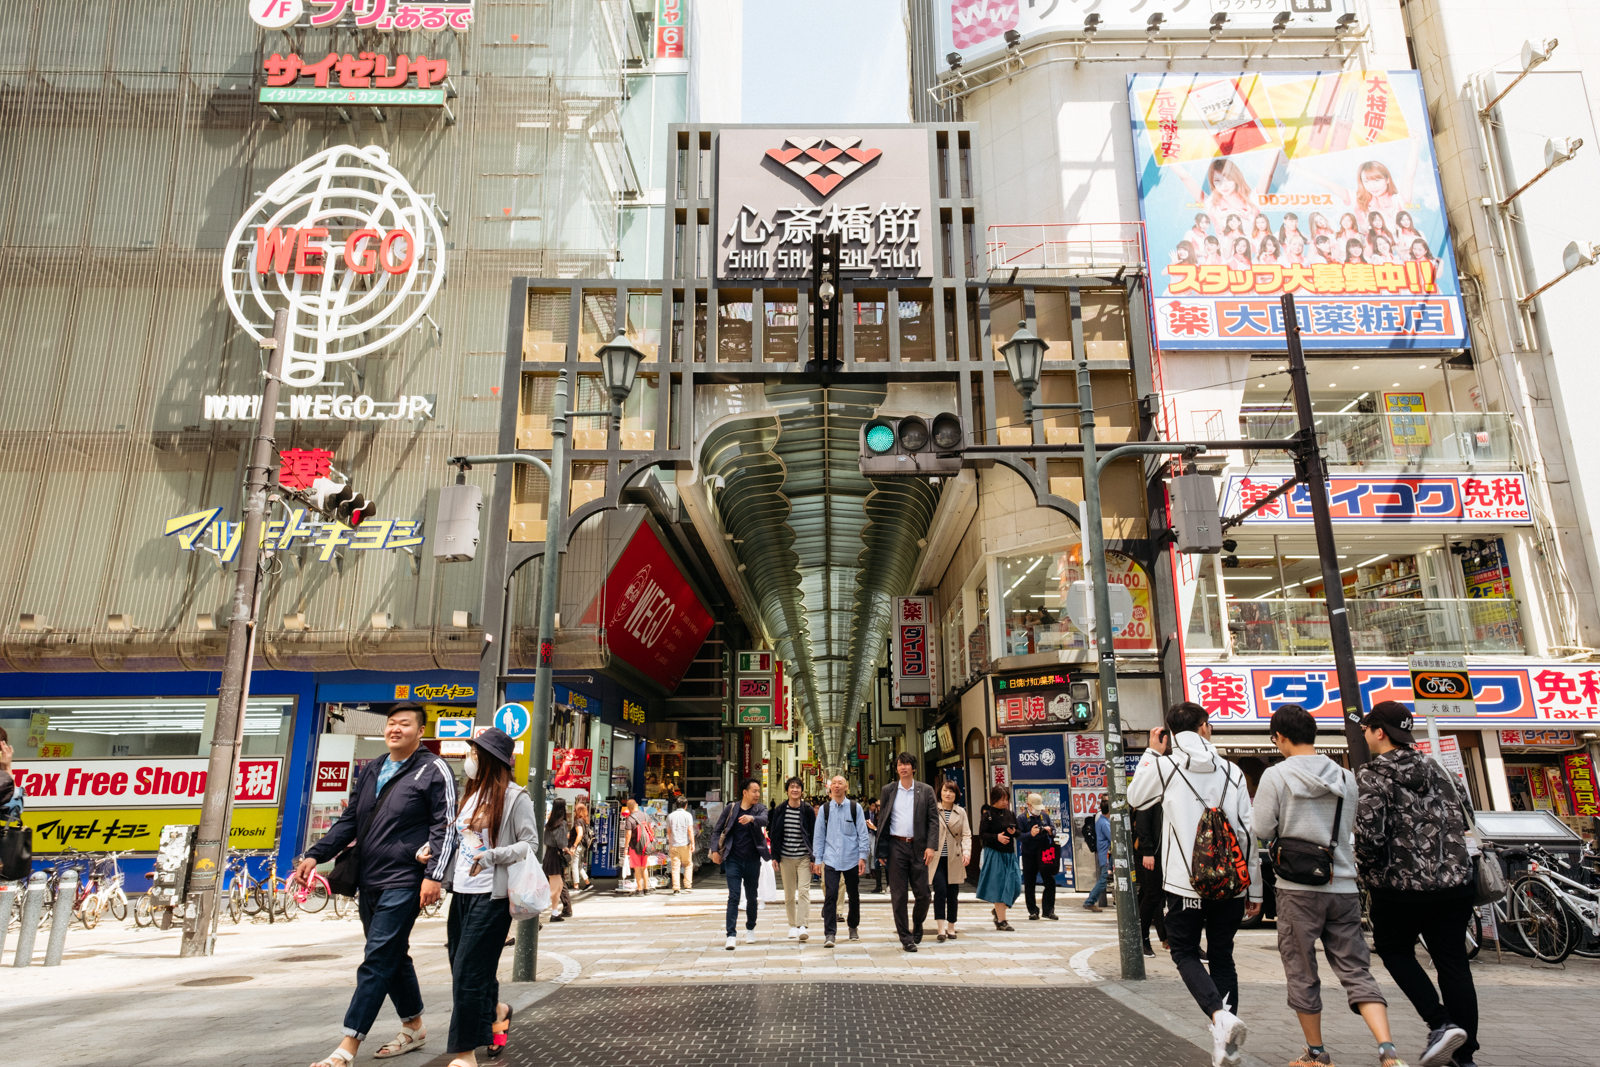 The Top 10 Things To Do and See In Shinsaibashi